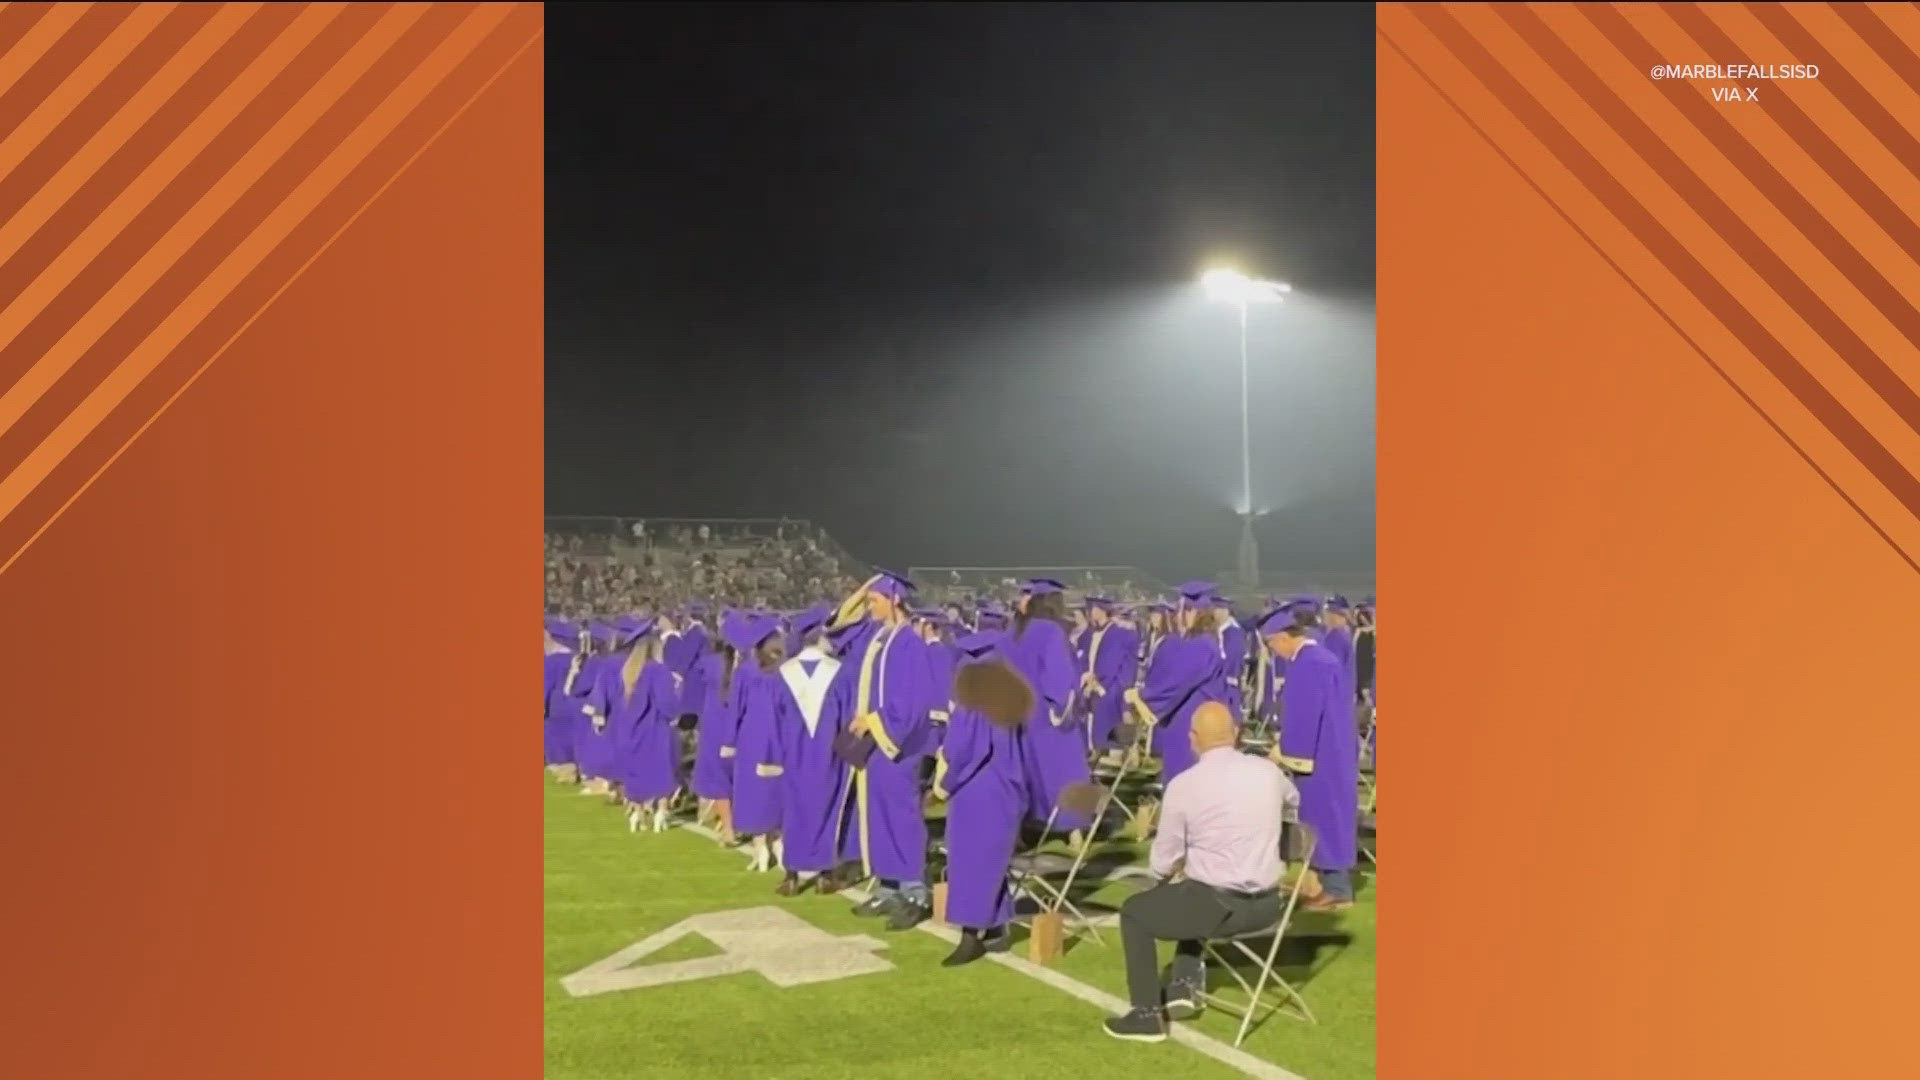 Thousands of high school seniors in Central Texas are celebrating their graduation this weekend.